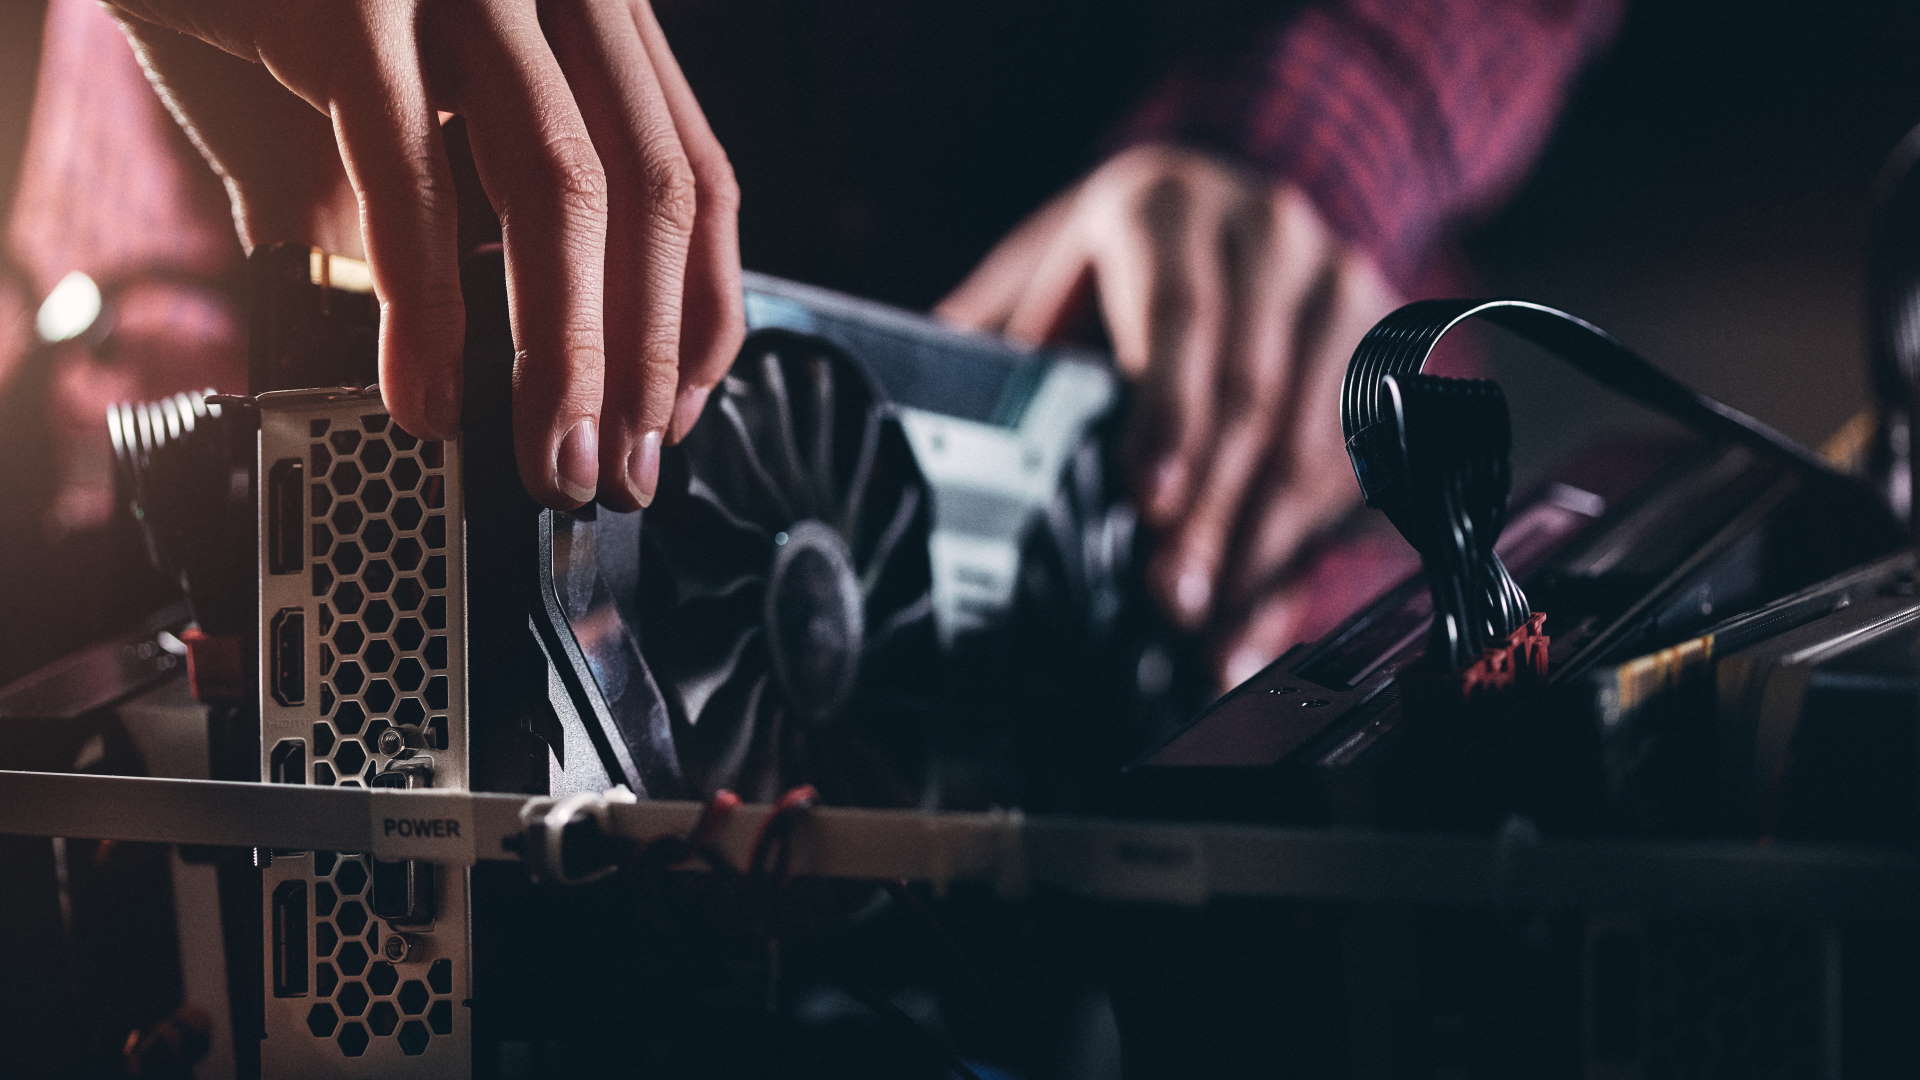 Graphics card being inserted or removed from a cryptocurrency mining setup